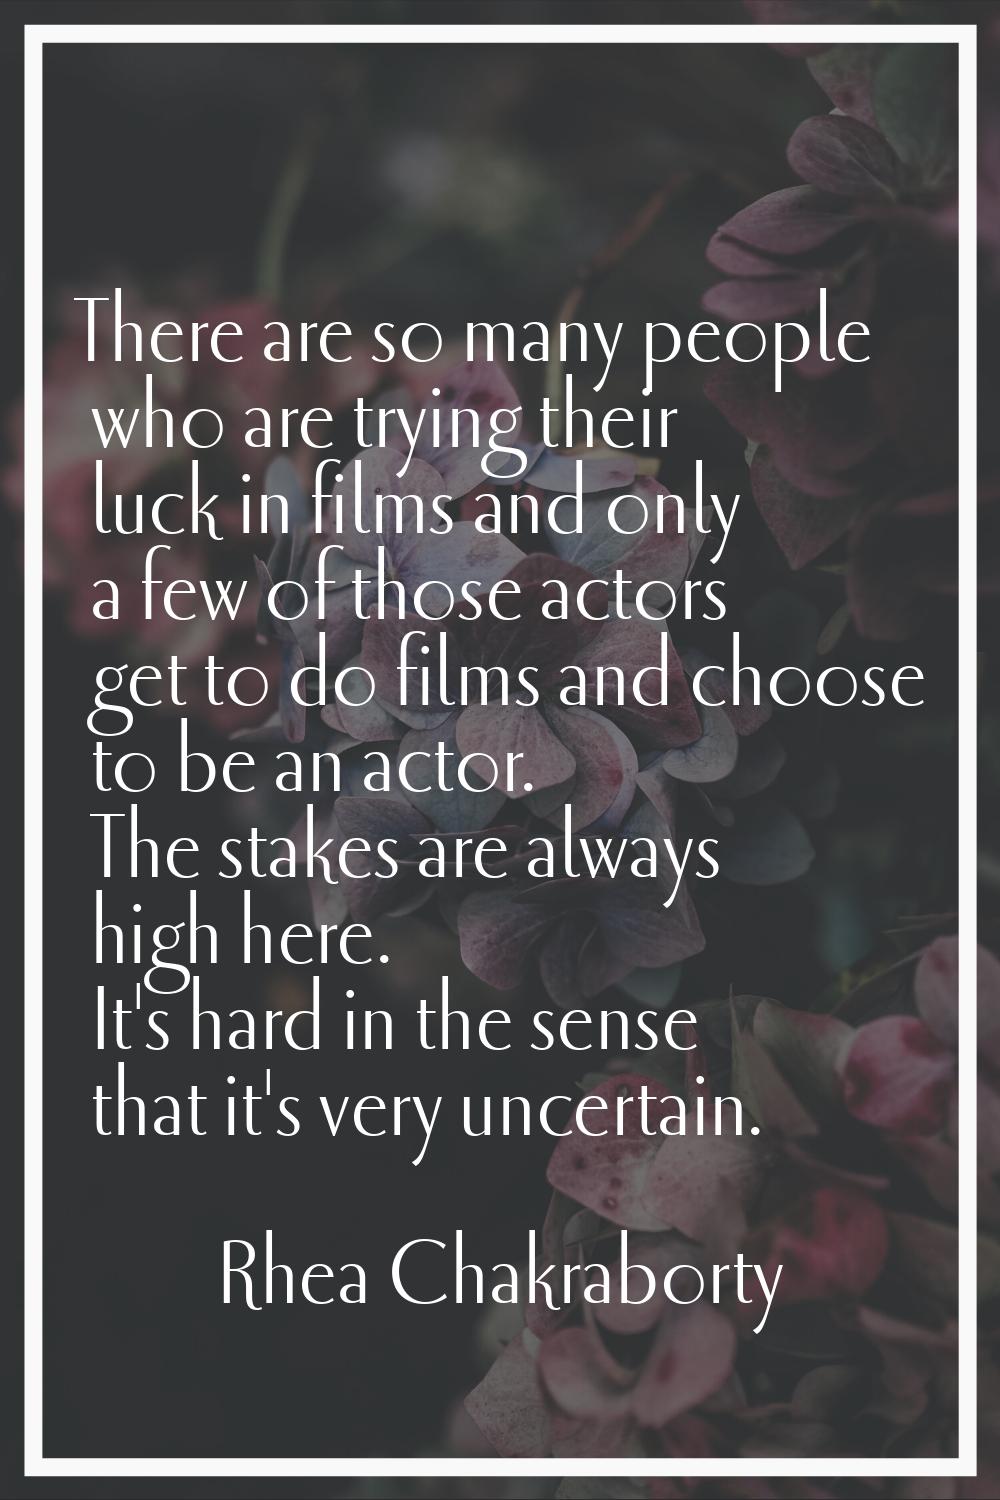 There are so many people who are trying their luck in films and only a few of those actors get to d